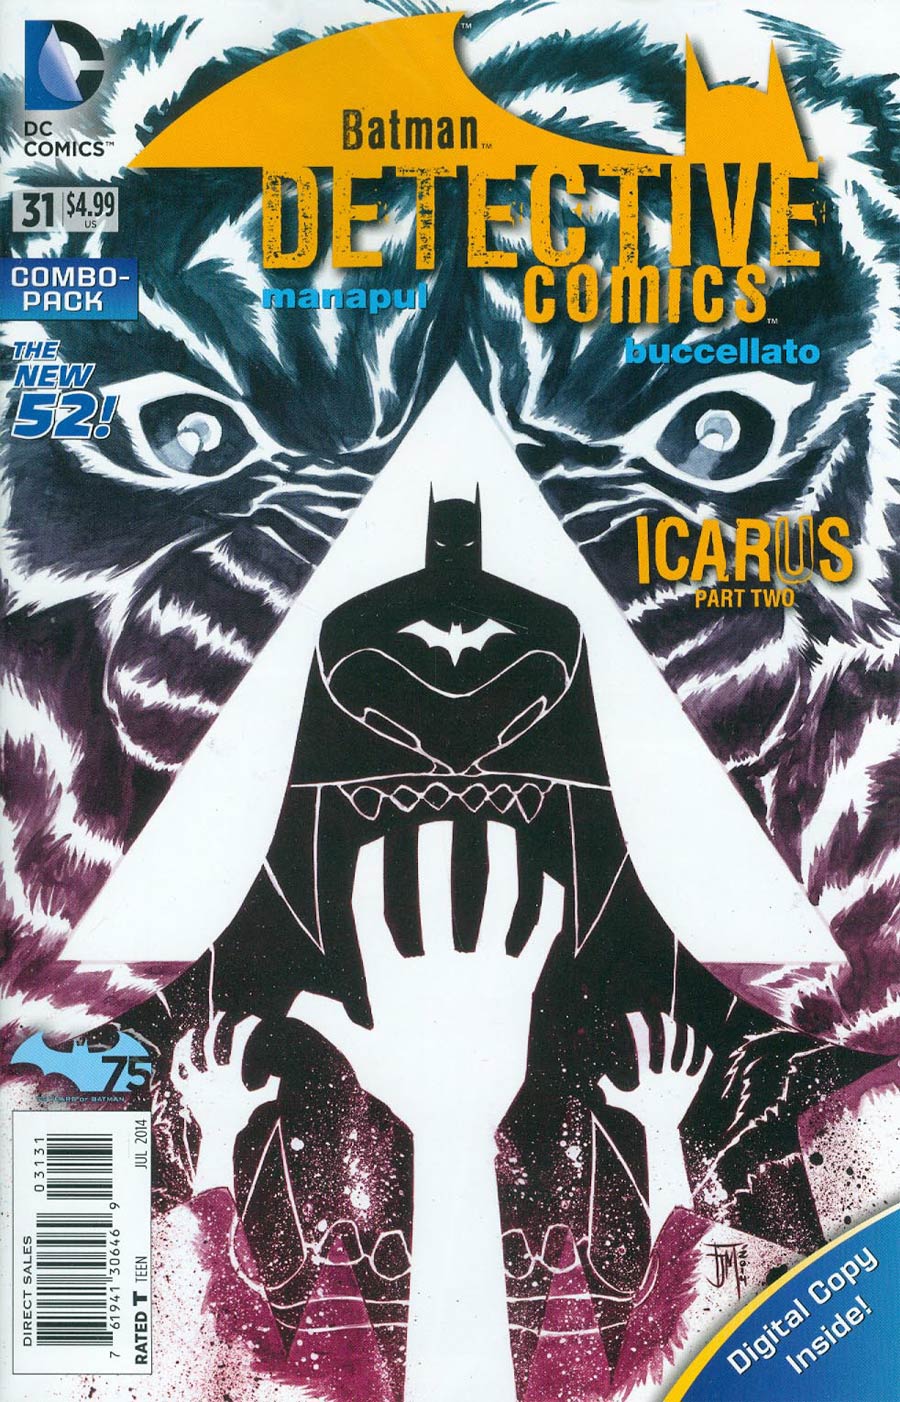 Detective Comics Vol 2 #31 Cover C Combo Pack Without Polybag